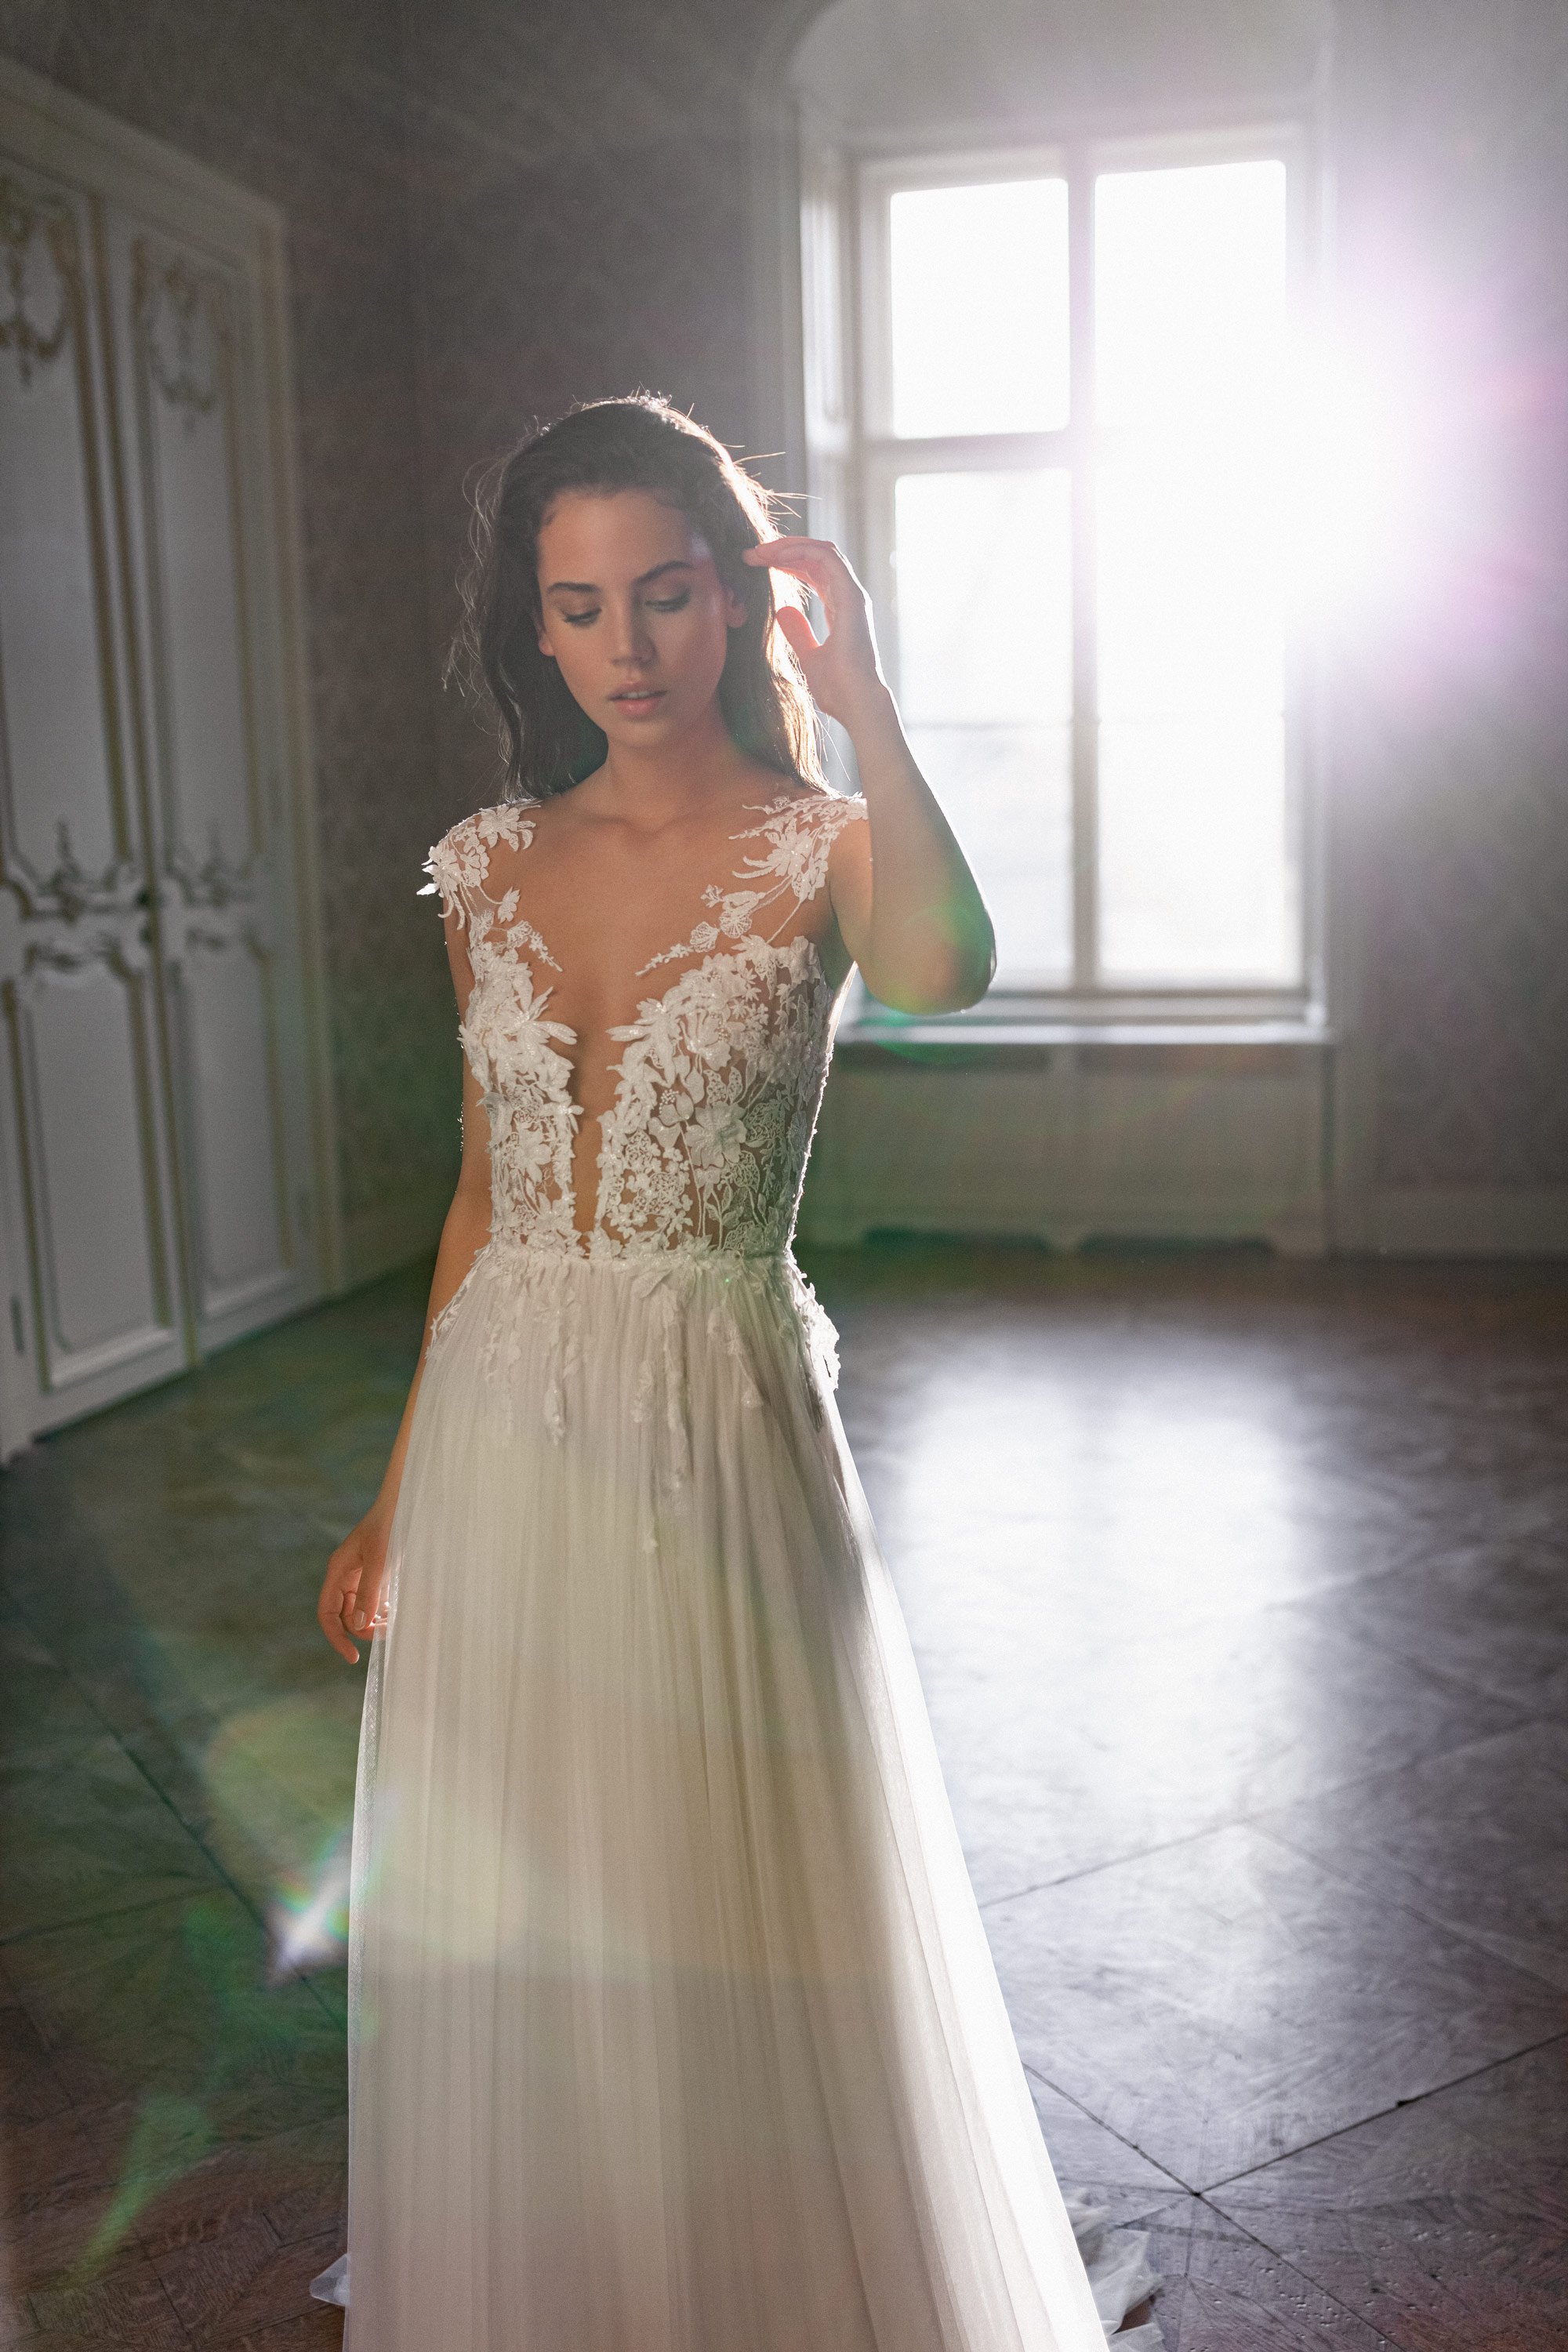 WildBride – Sample Sale Gowns: Limited Time Offers